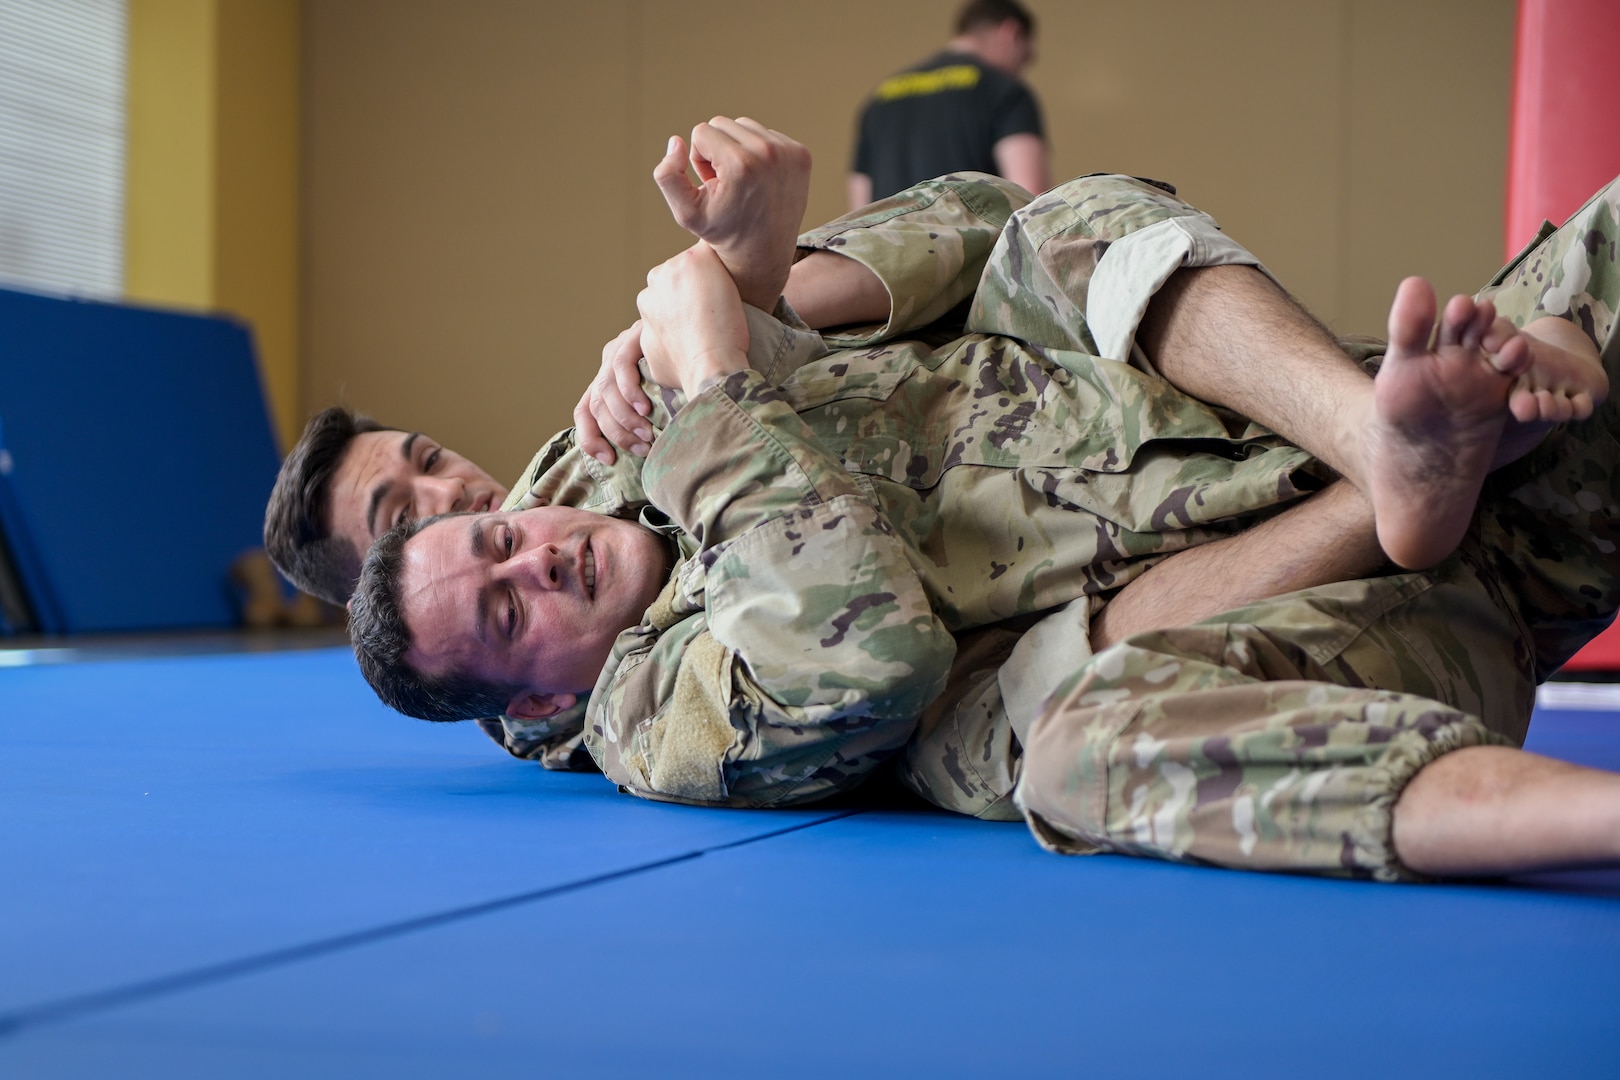 U.S. Air Force Tech. Sgt. Jose Marrero and Airman 1st Class Jonathan Milian, security forces journeymen with the 156th Security Operations Squadron, learned the basics of becoming a combatives instructor March 16, 2022, at Muñiz Air National Guard Base, Puerto Rico. Twenty-two Airmen participated in the 40-hour Air Force Combatives Program.